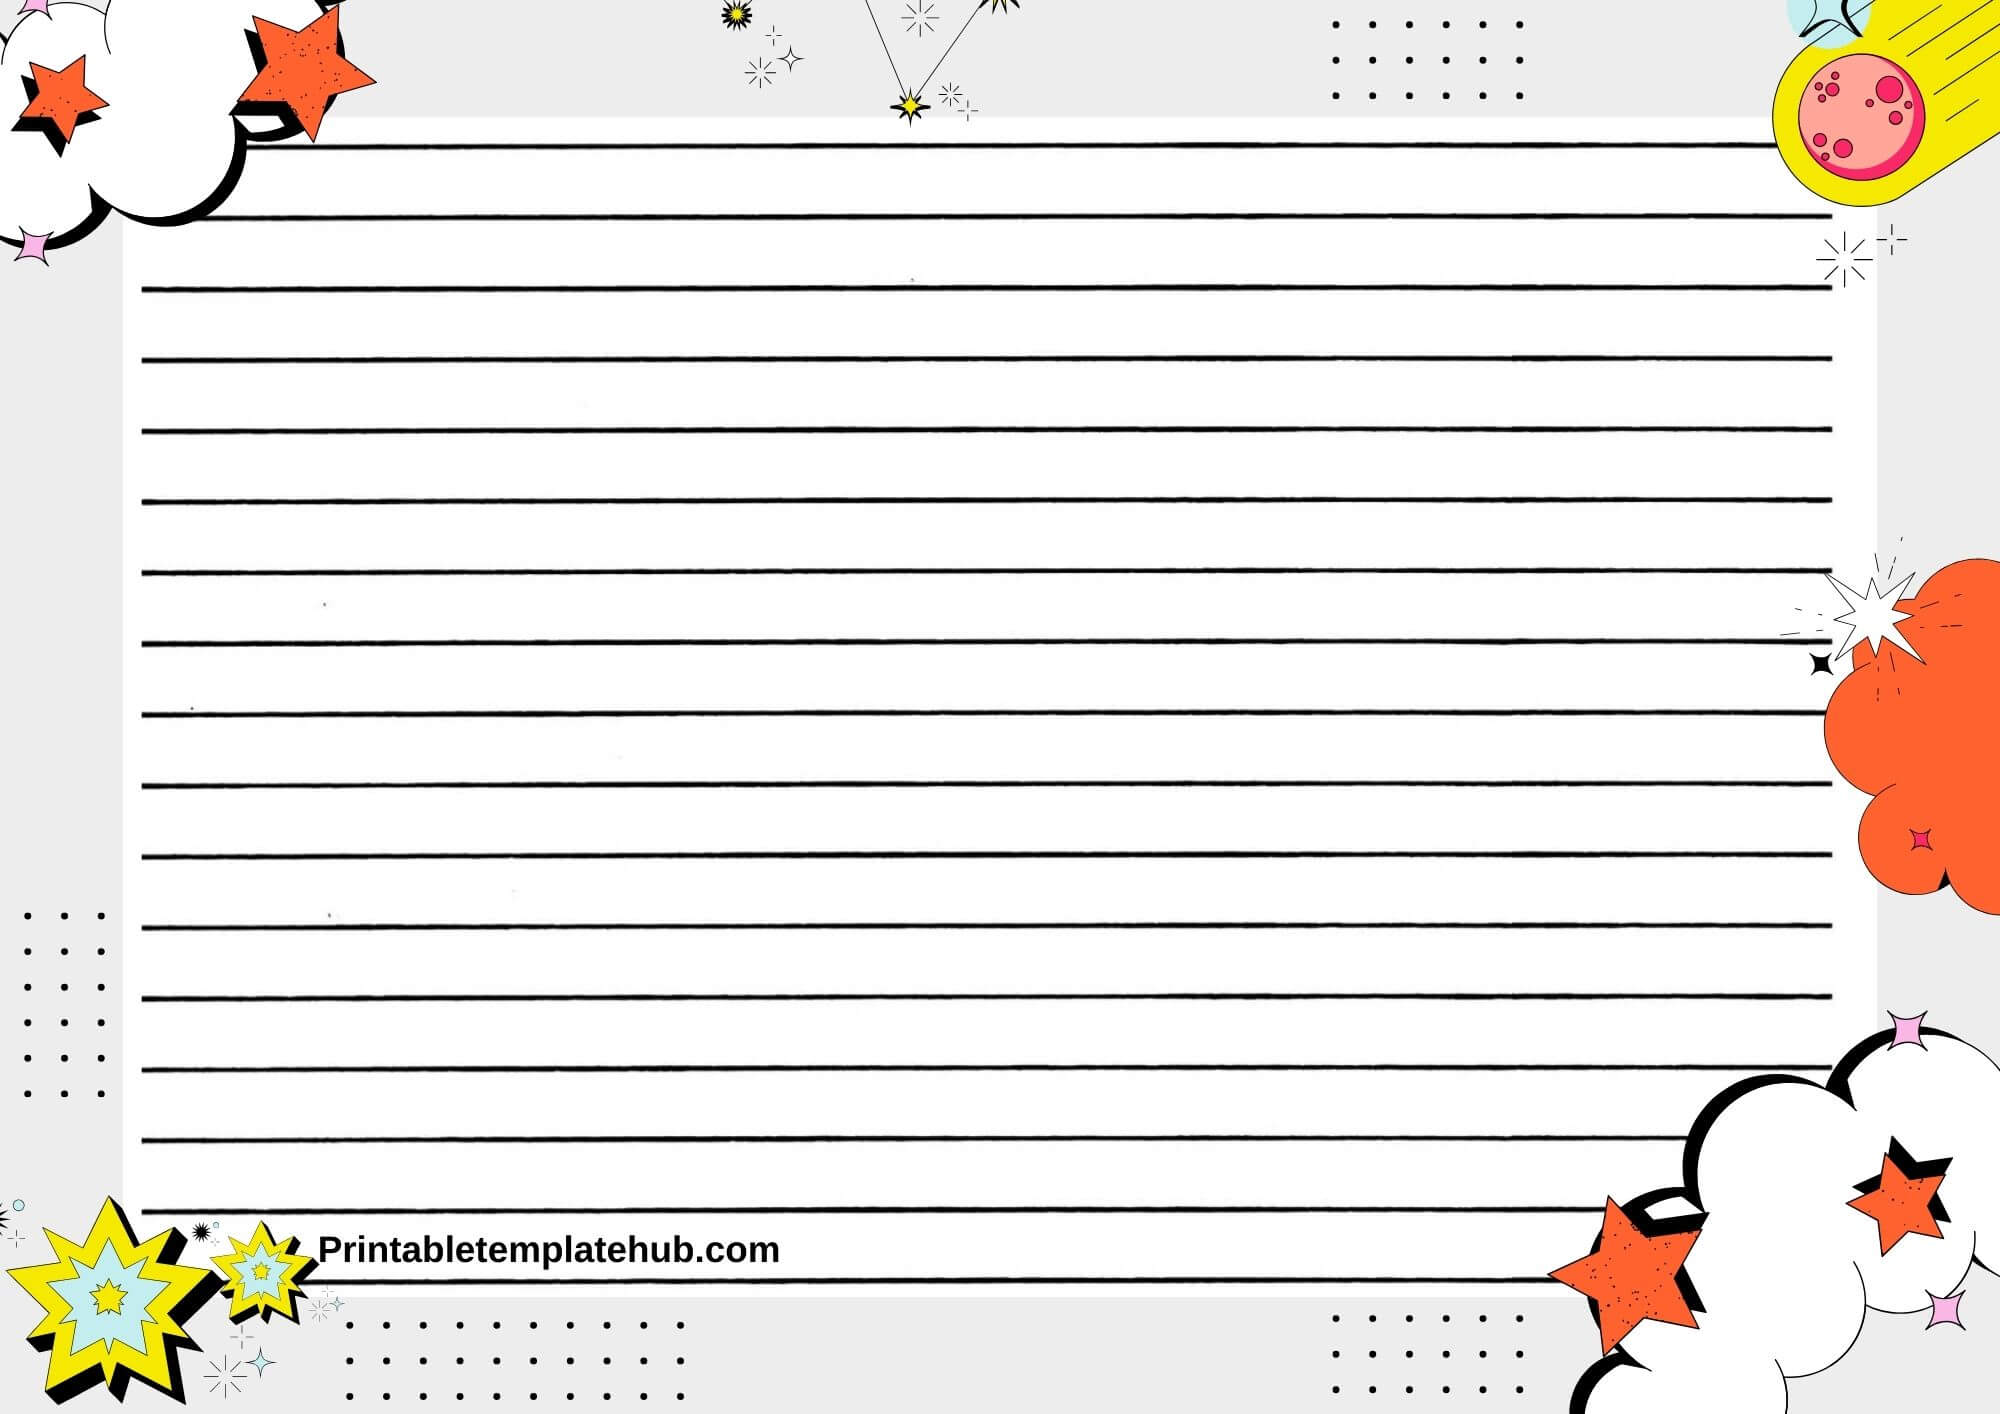 Elementary lined paper printable